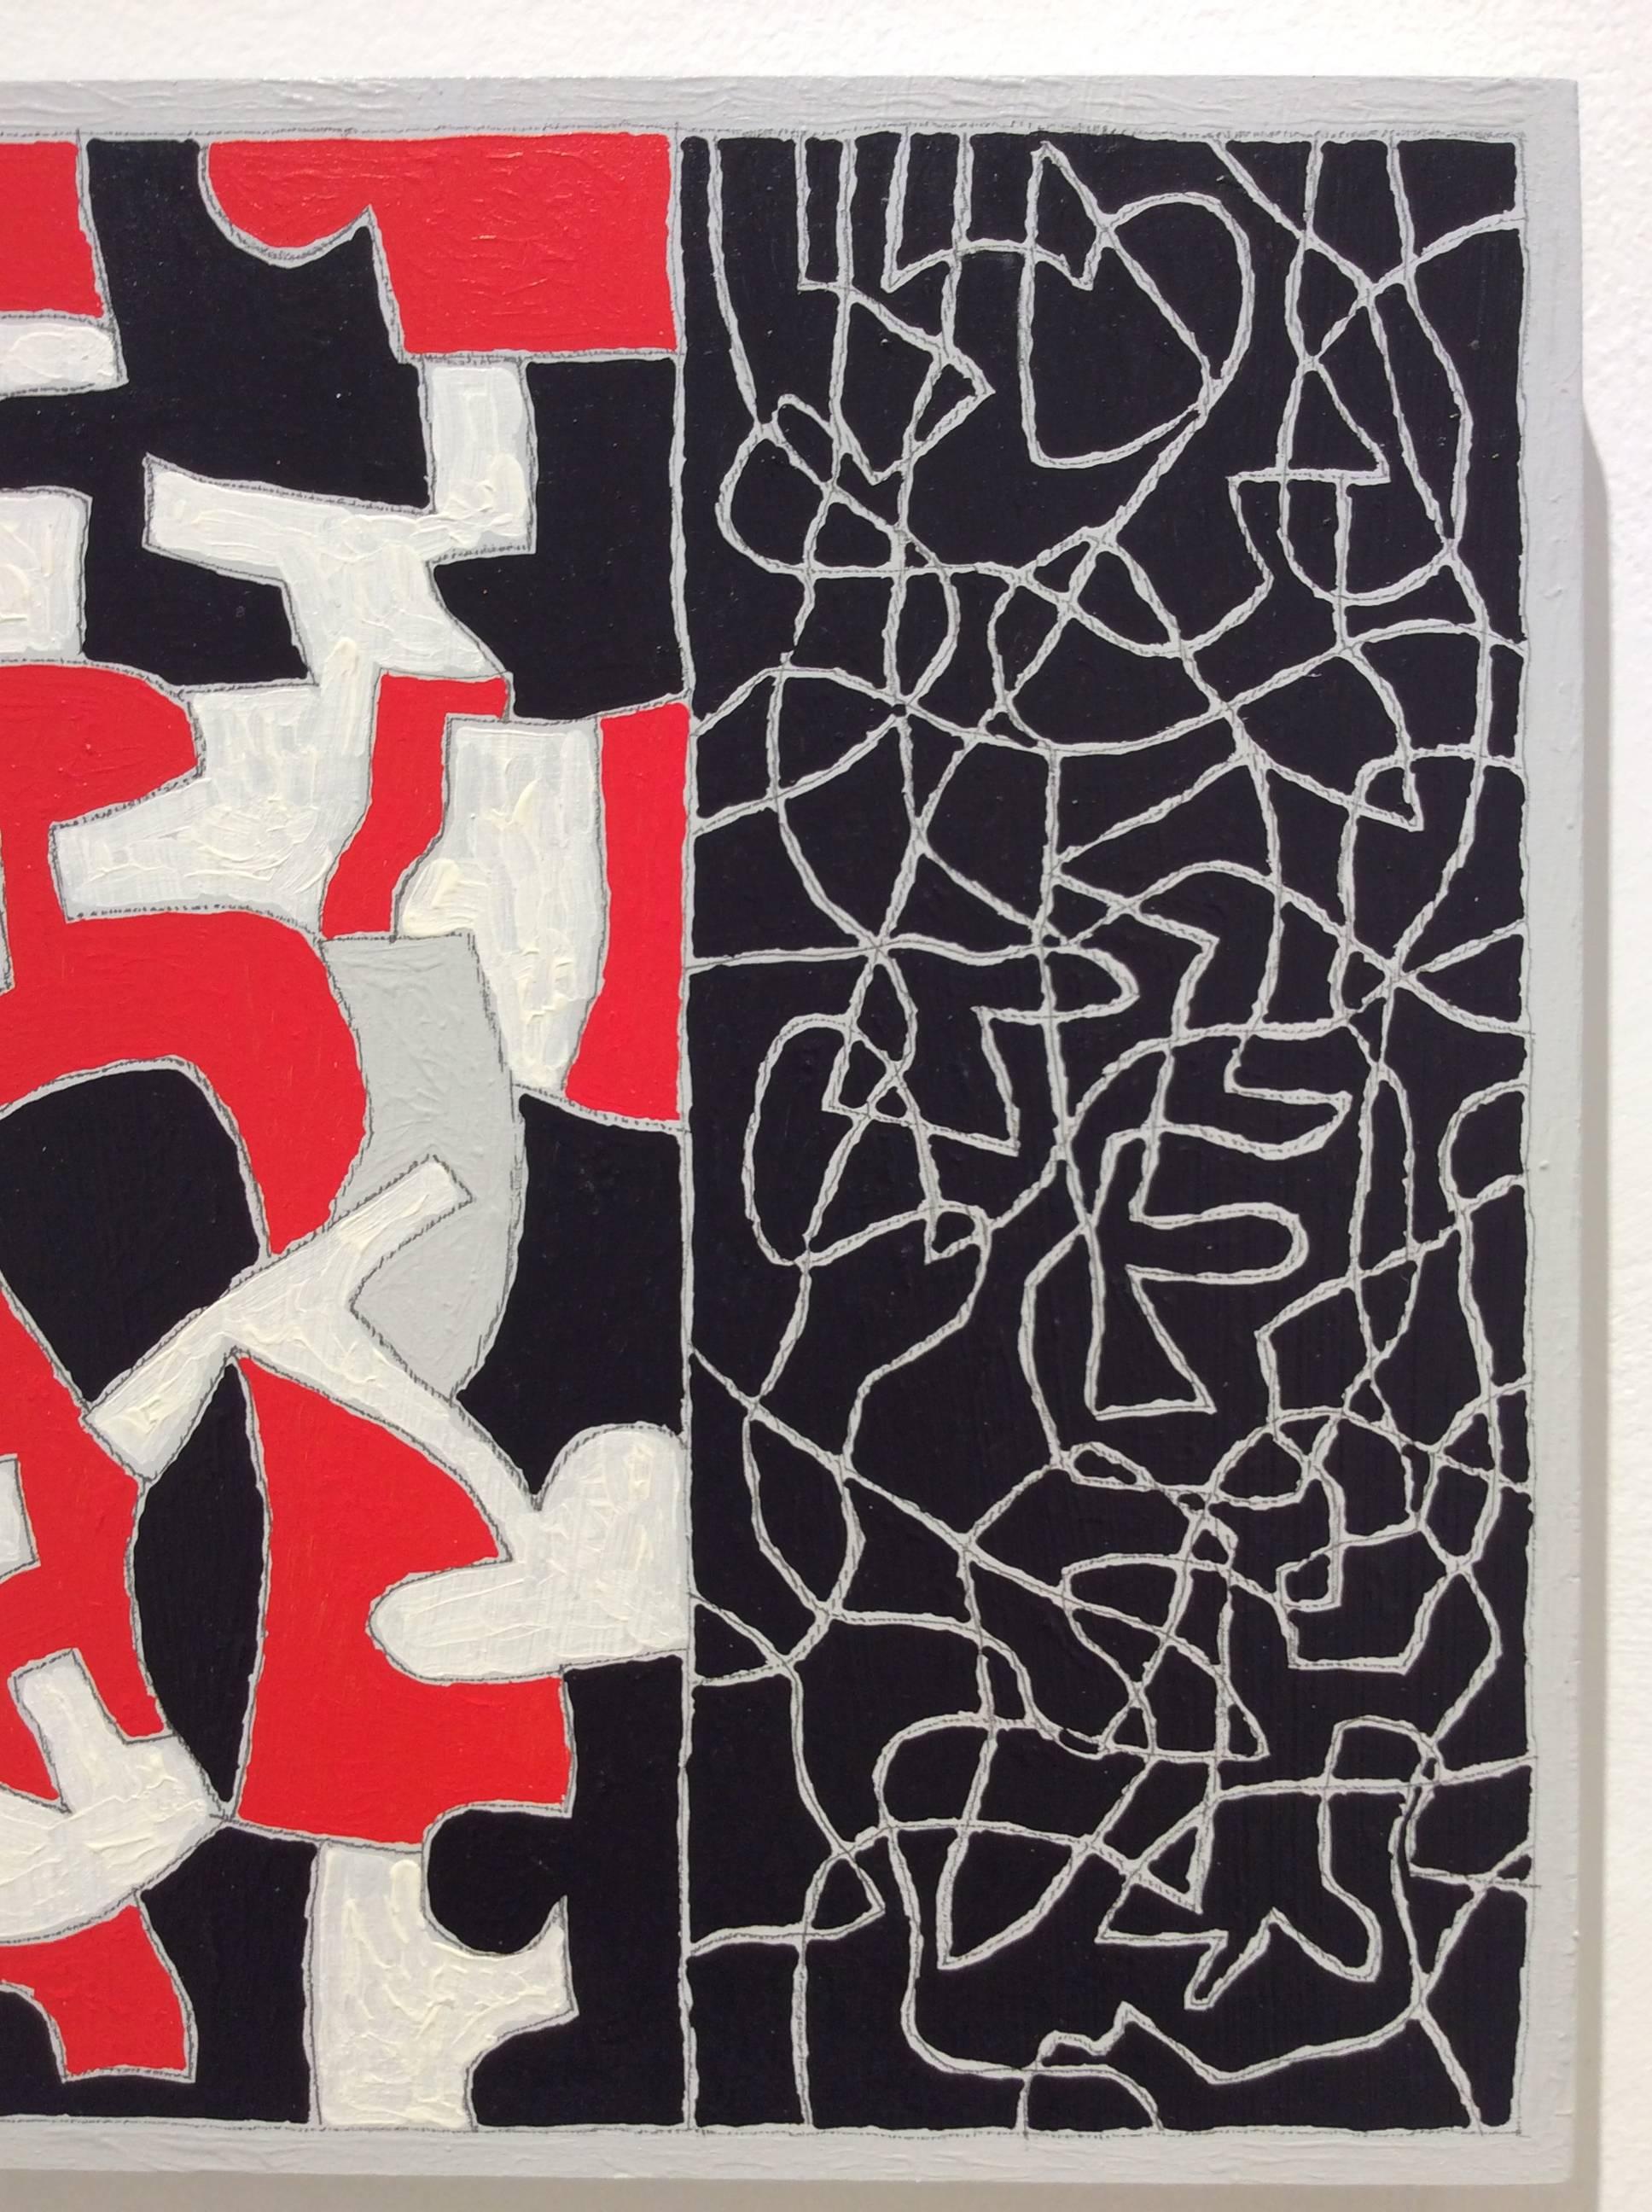 8 x 8 inches 
oil paint on wood panel 

This contemporary, abstract oil painting in graphic black, white, & red was completed by Vermont based artist, Paul Katz, in 2016. Studying line and color, the artist contrasts a puzzle-like design on the left